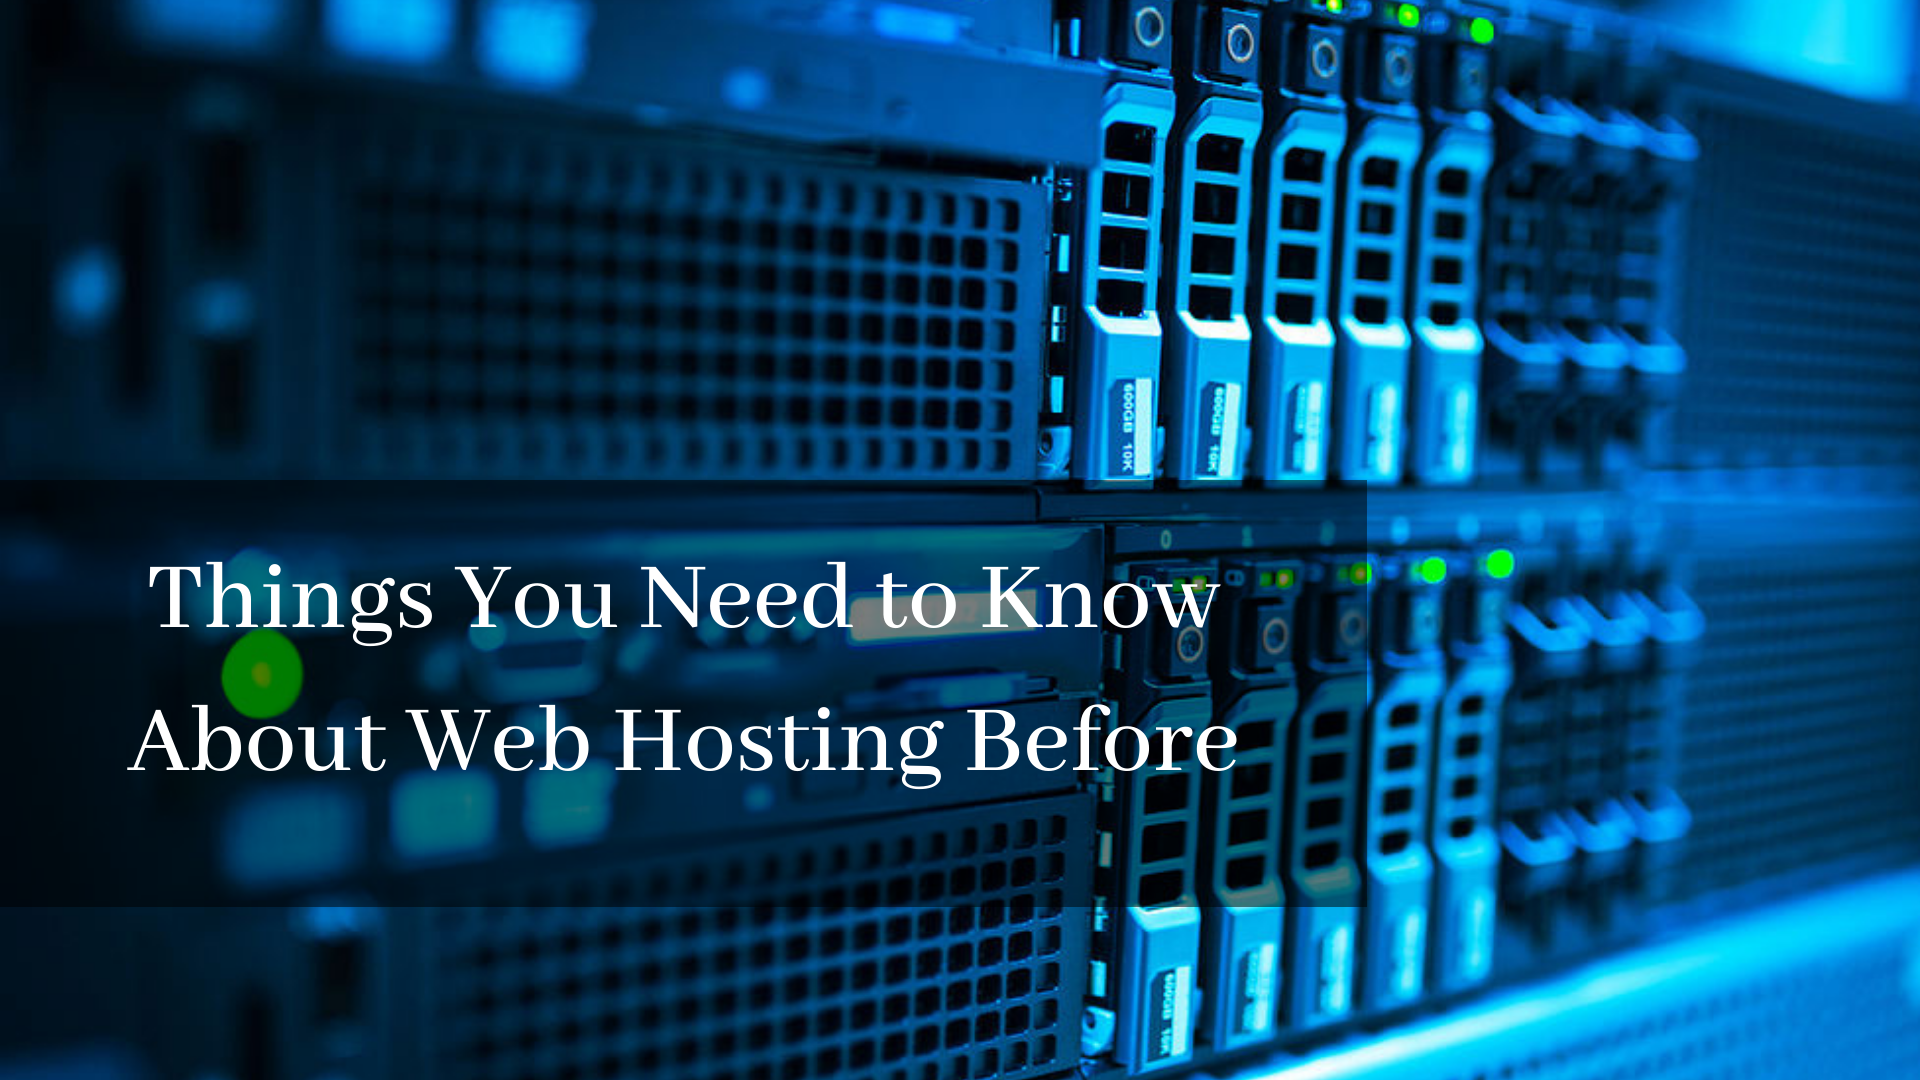 Top Things You Need to Know About Web Hosting Before